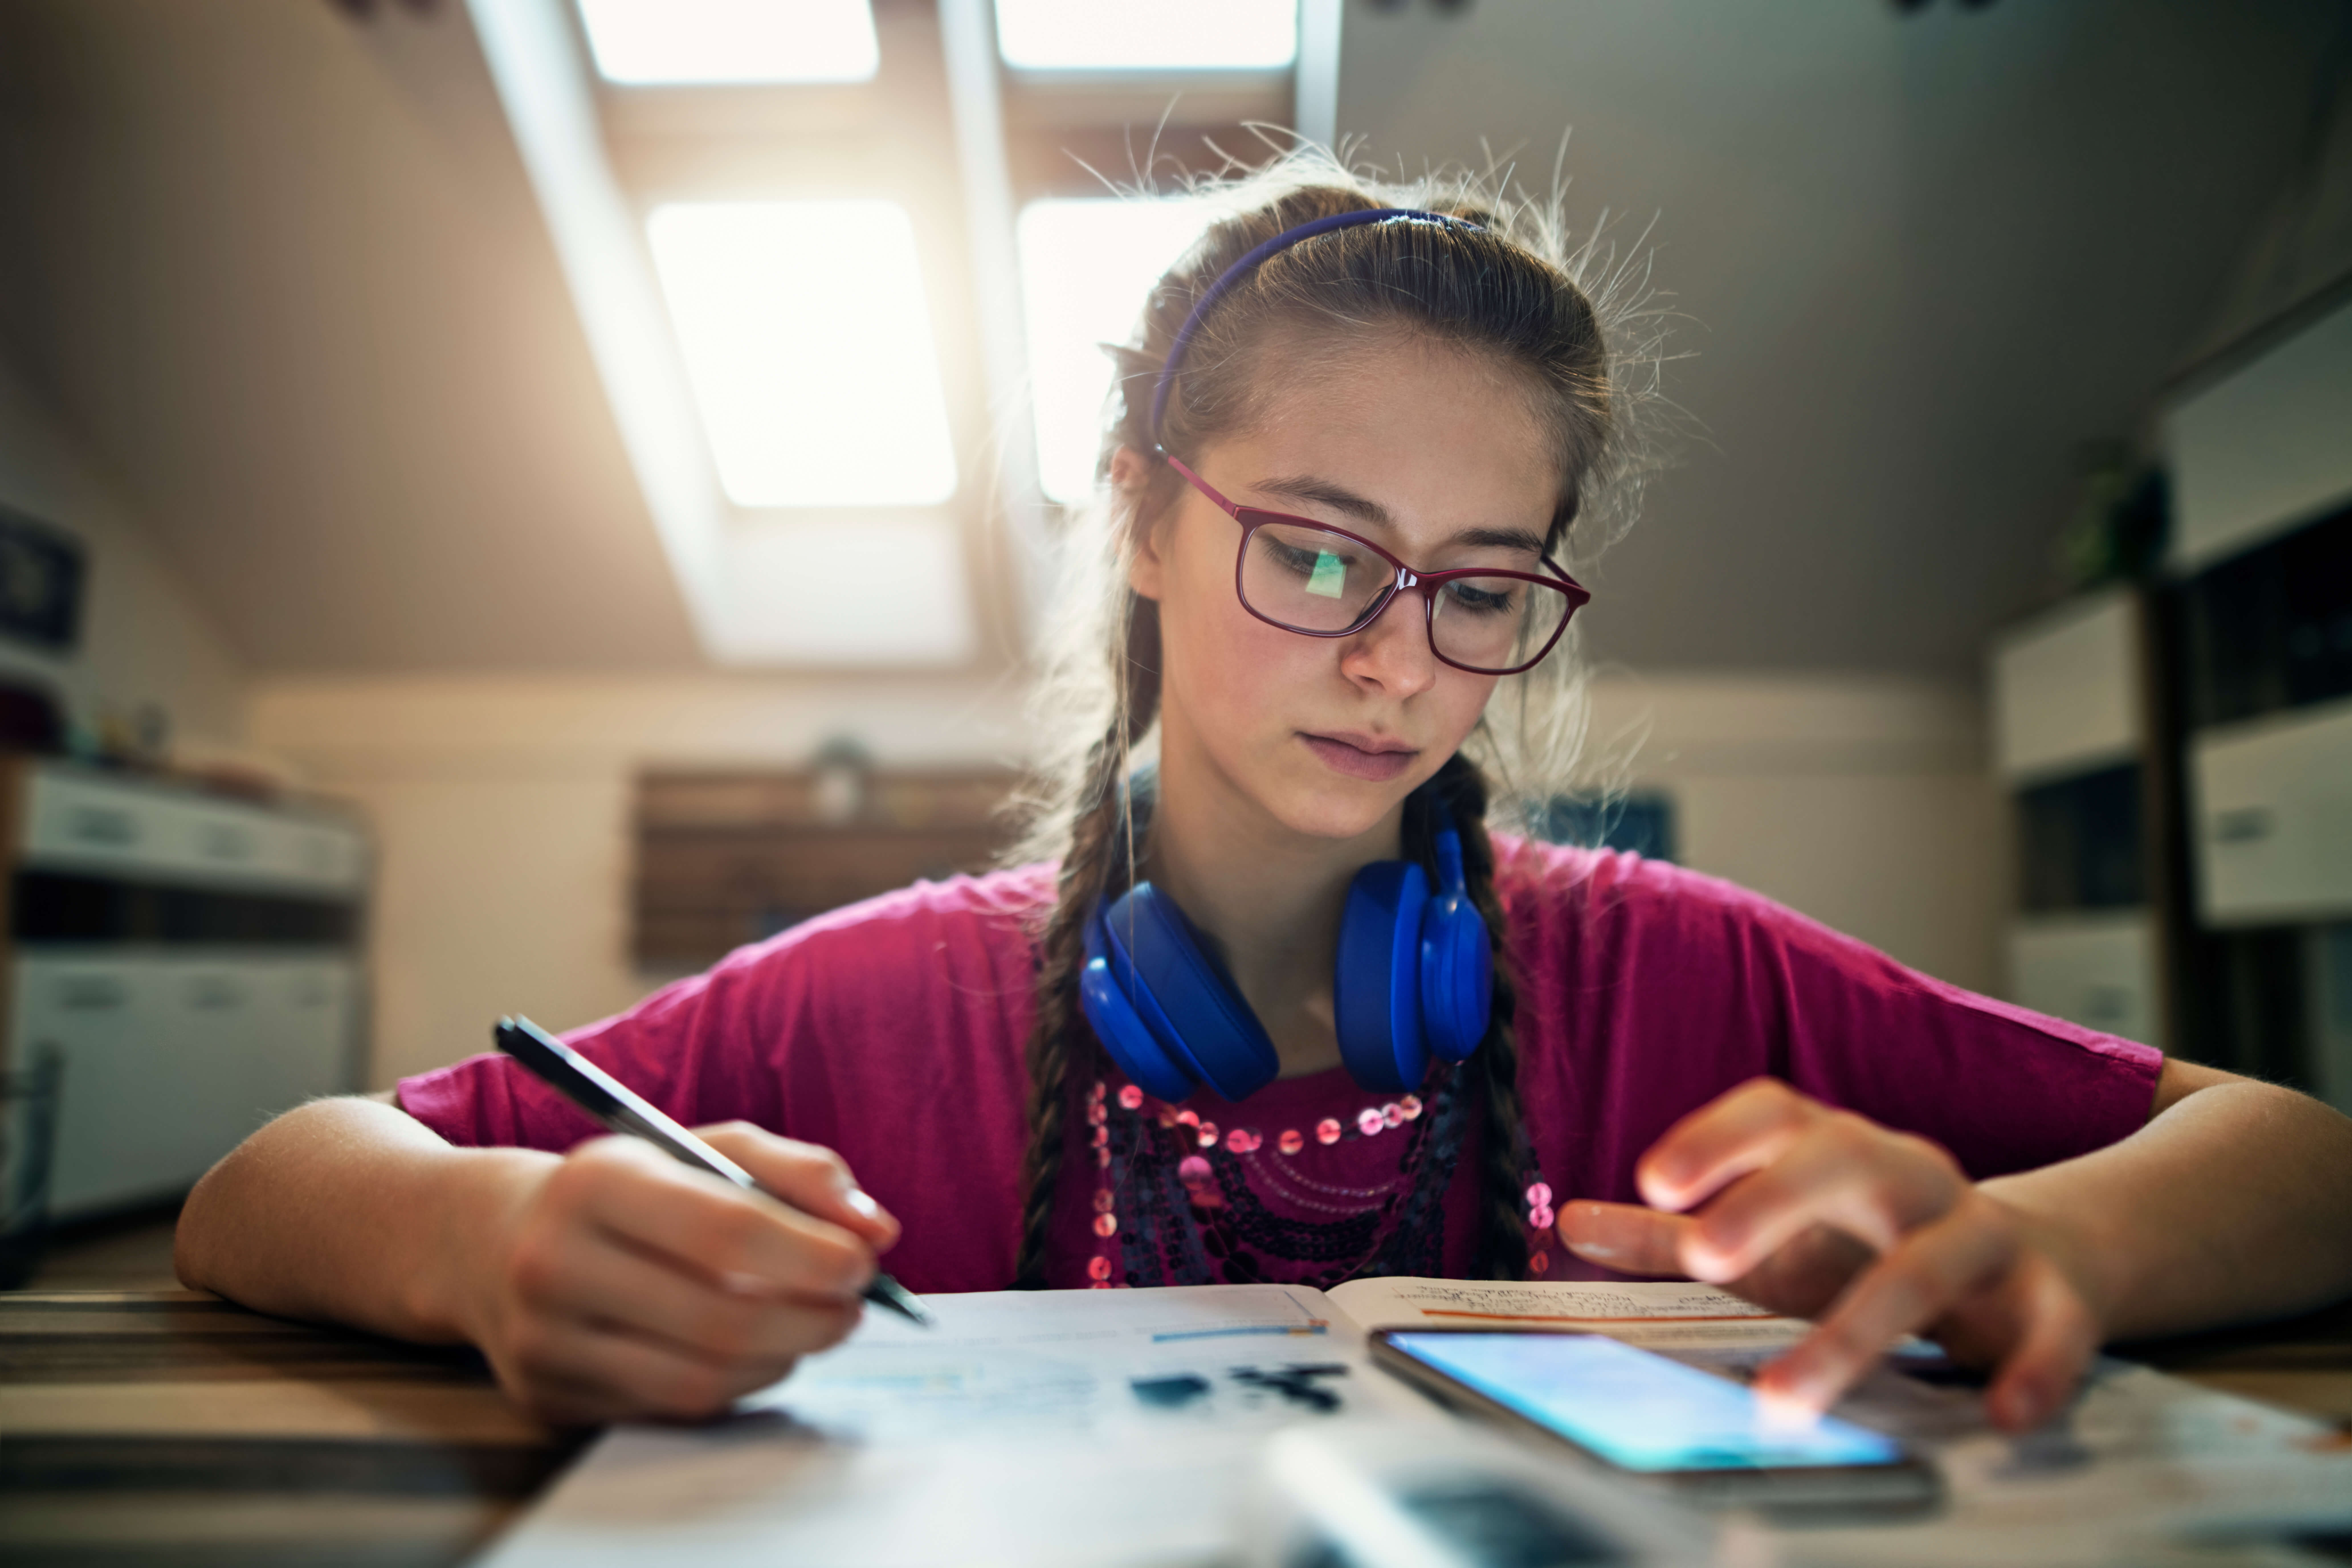 New survey shows teens believe reliable broadband is a key driver of equity and opportunity, call for government action